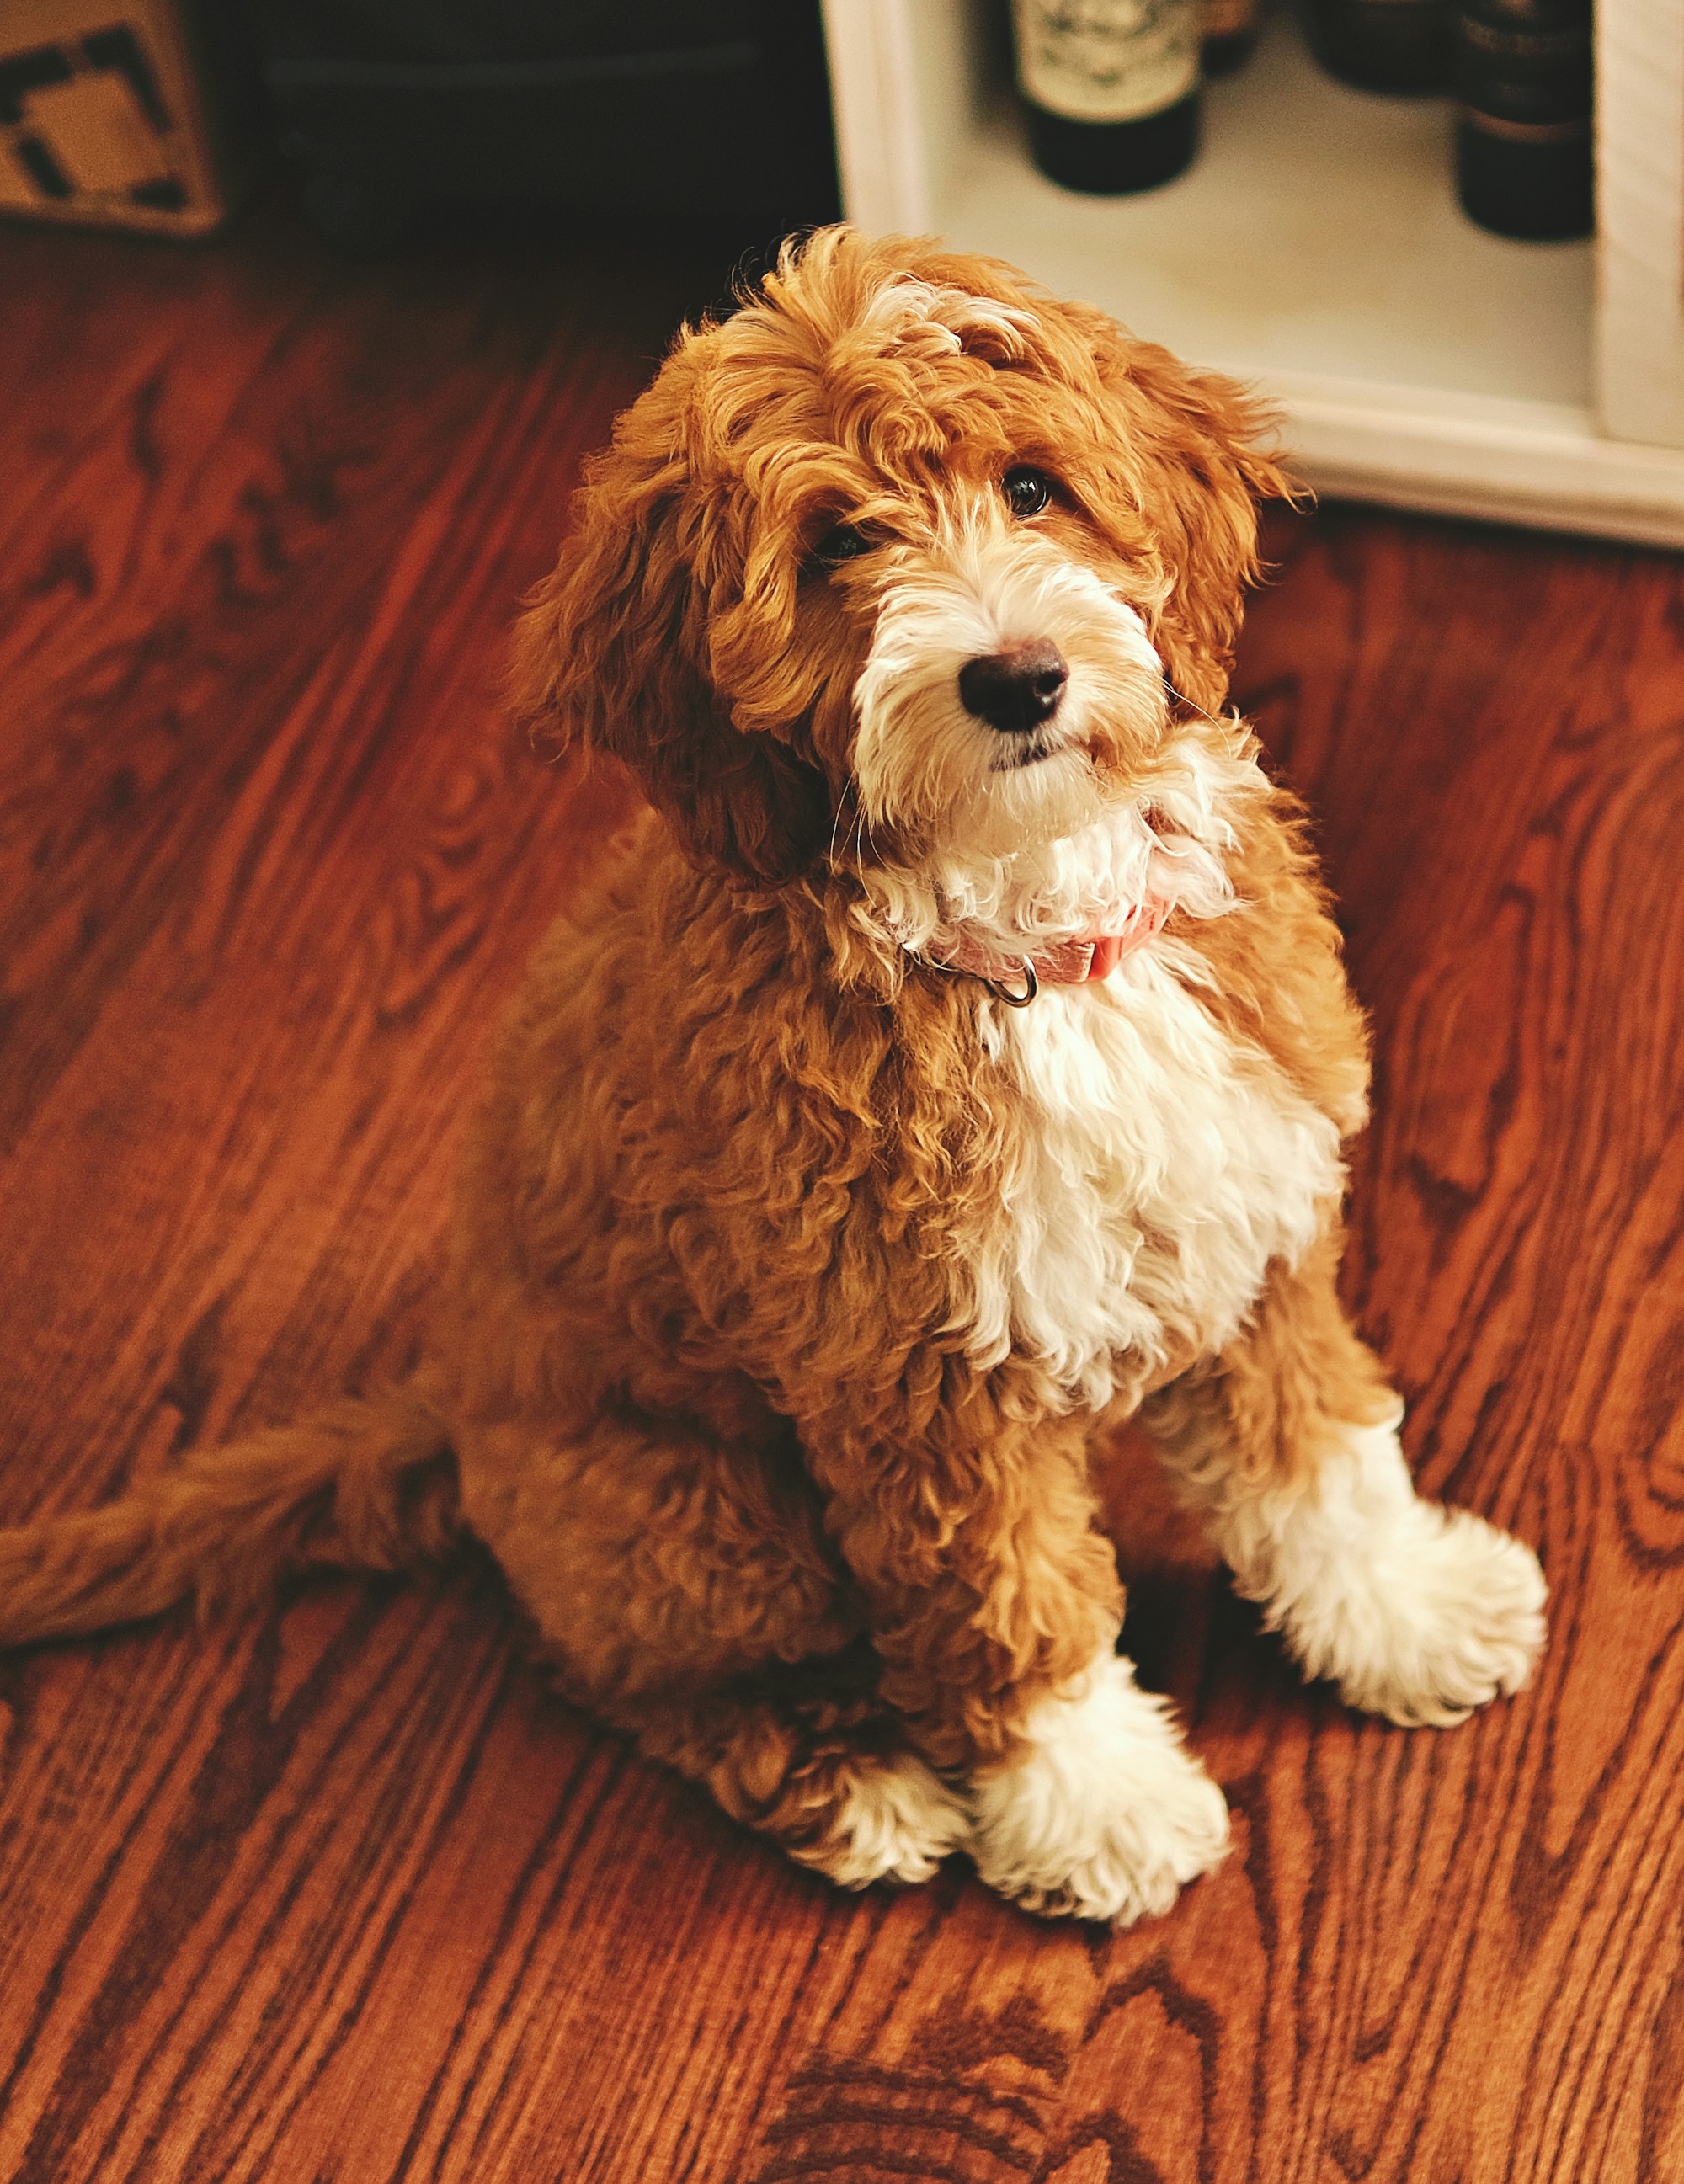 A brown and white goldendoodle sitting upright.